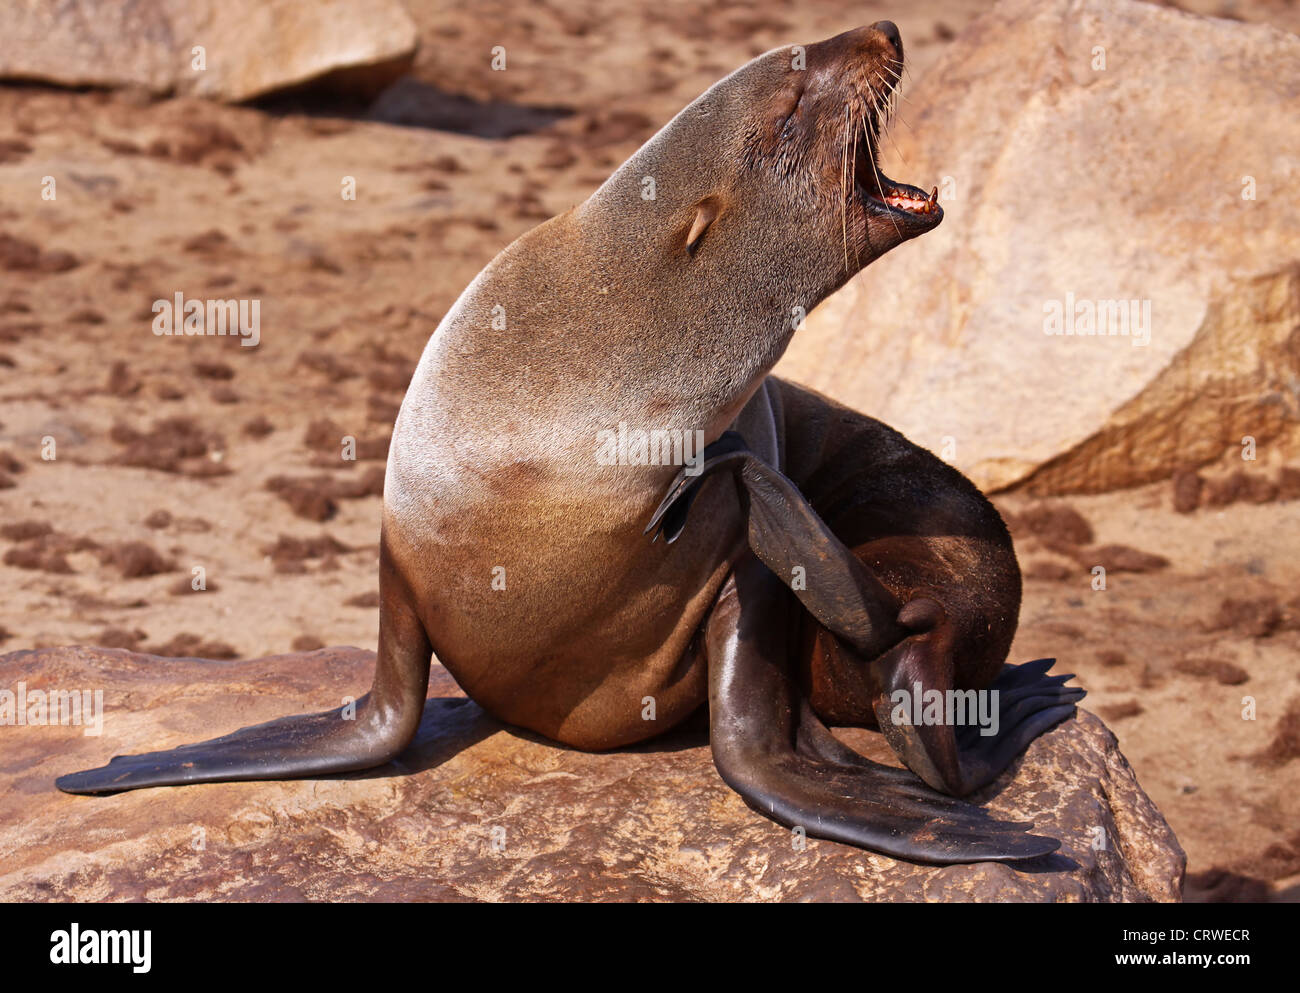 South African fur seal, cape cross, Namibia Stock Photo